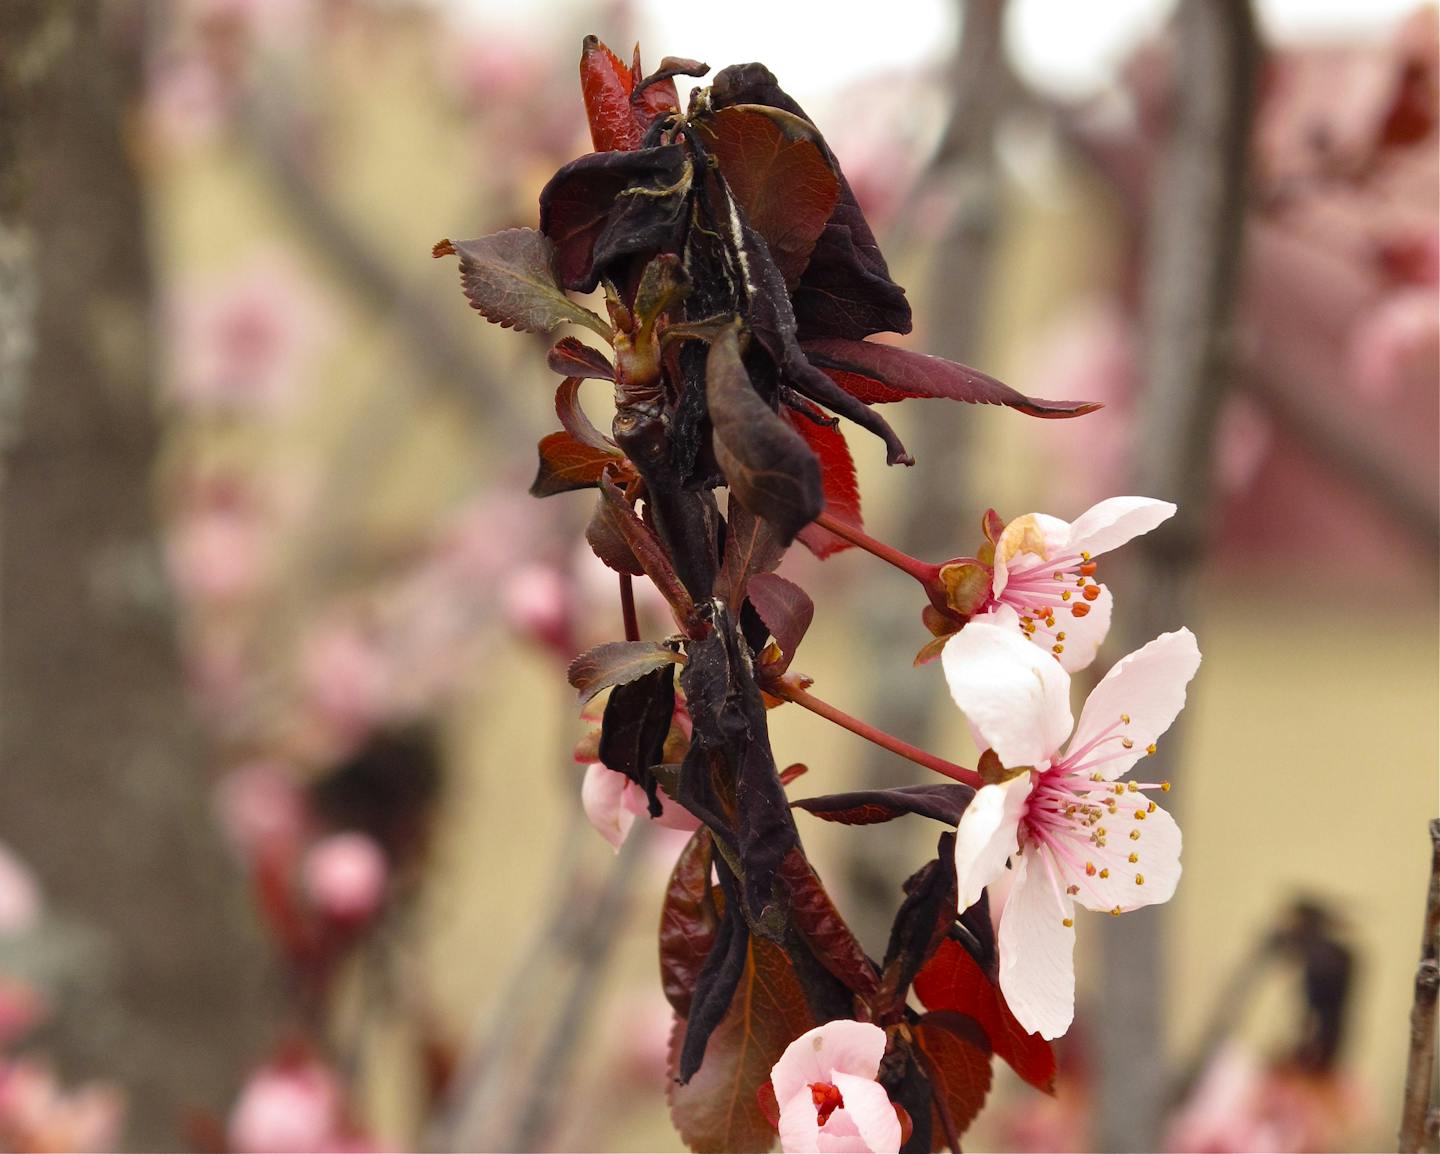 Cherry branch with blooms and wilted dark leaves.